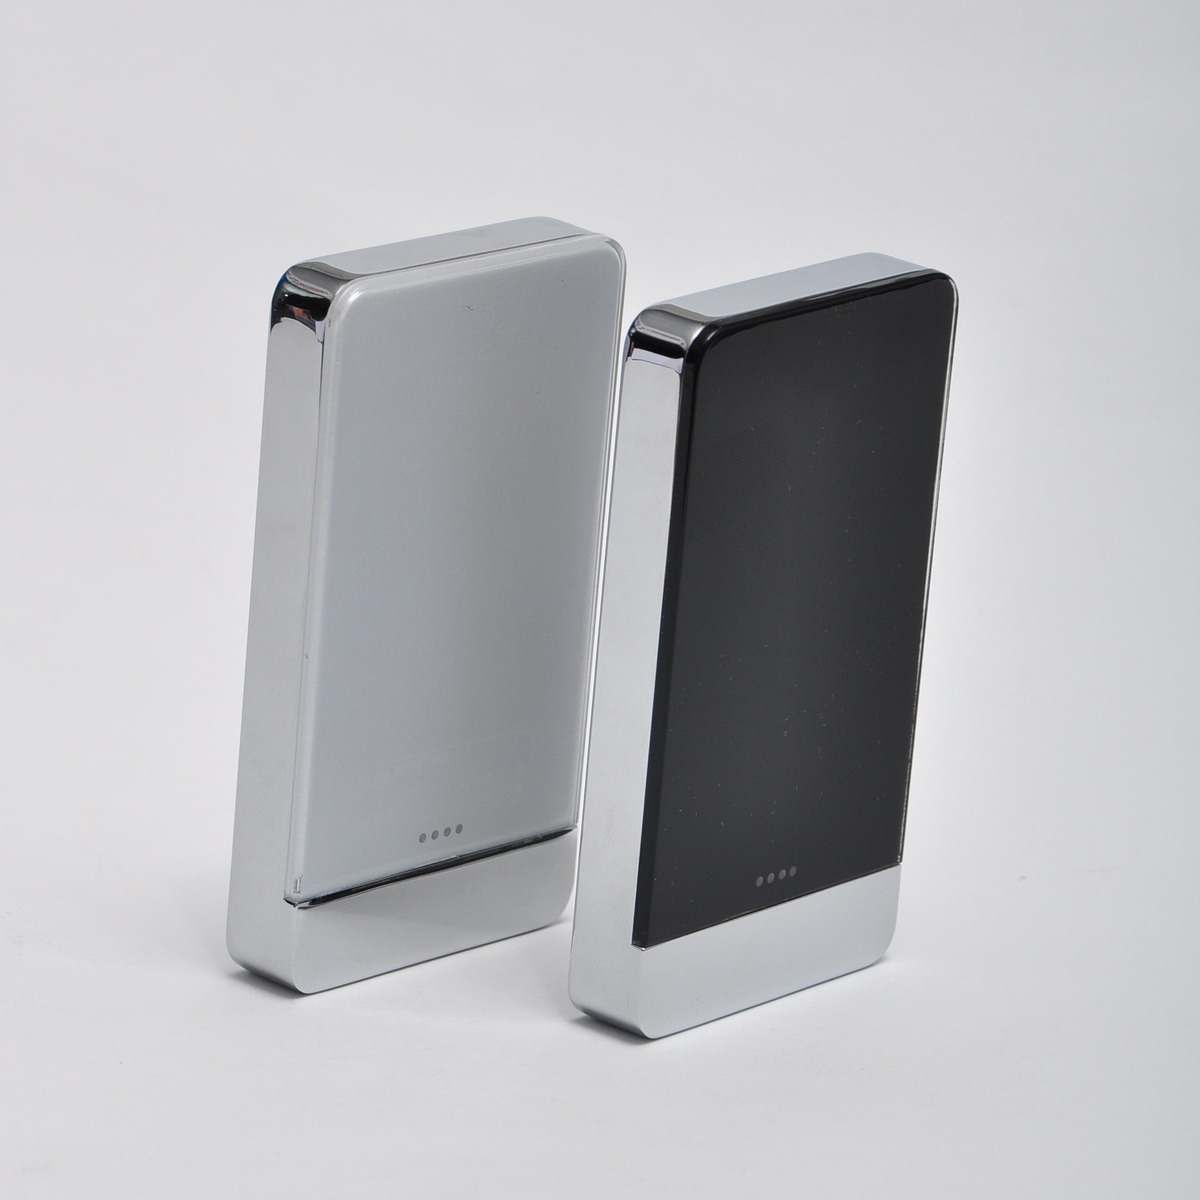 5000mAh Portable Power Bank for iPhone/iPad/Tablet/Mobile Phone (YH-PP5000)